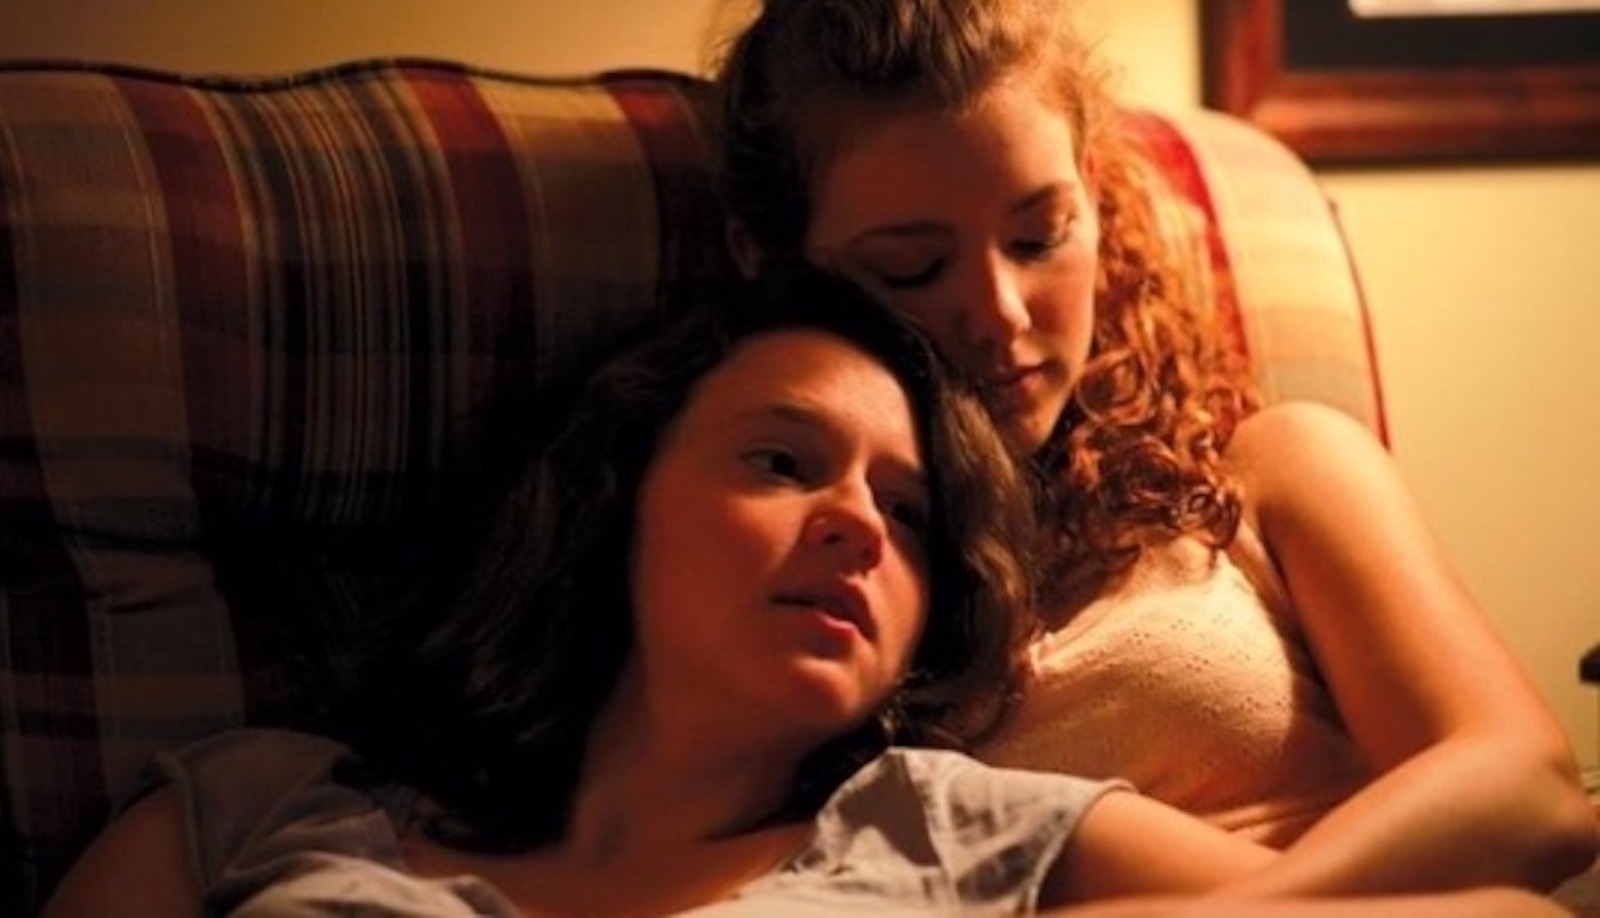 Two young woman sit on a couch, holding each other